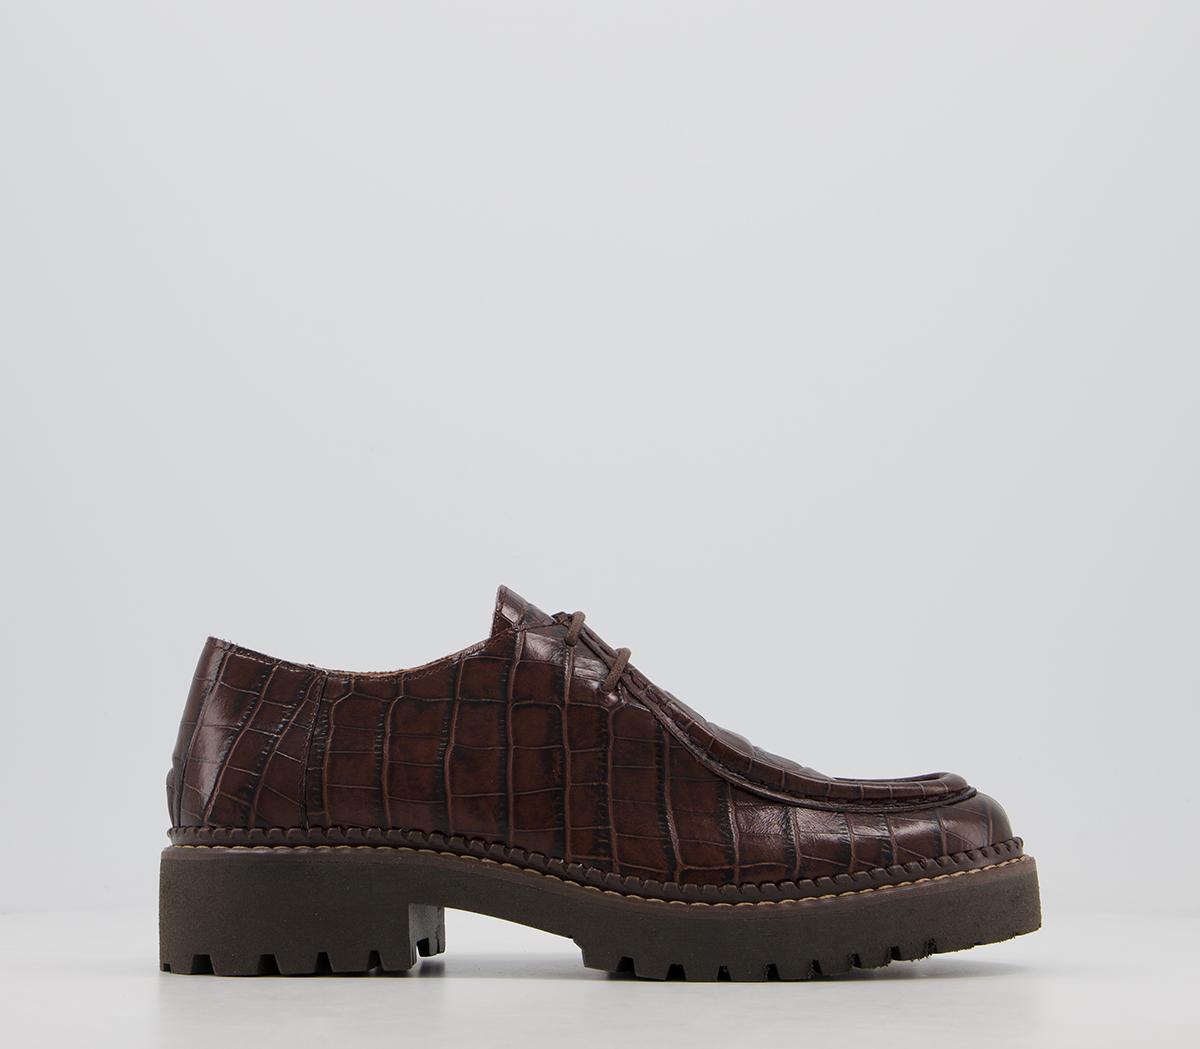 OFFICEFusion Chunky Cleated Lace Up FlatsBrown Croc Leather